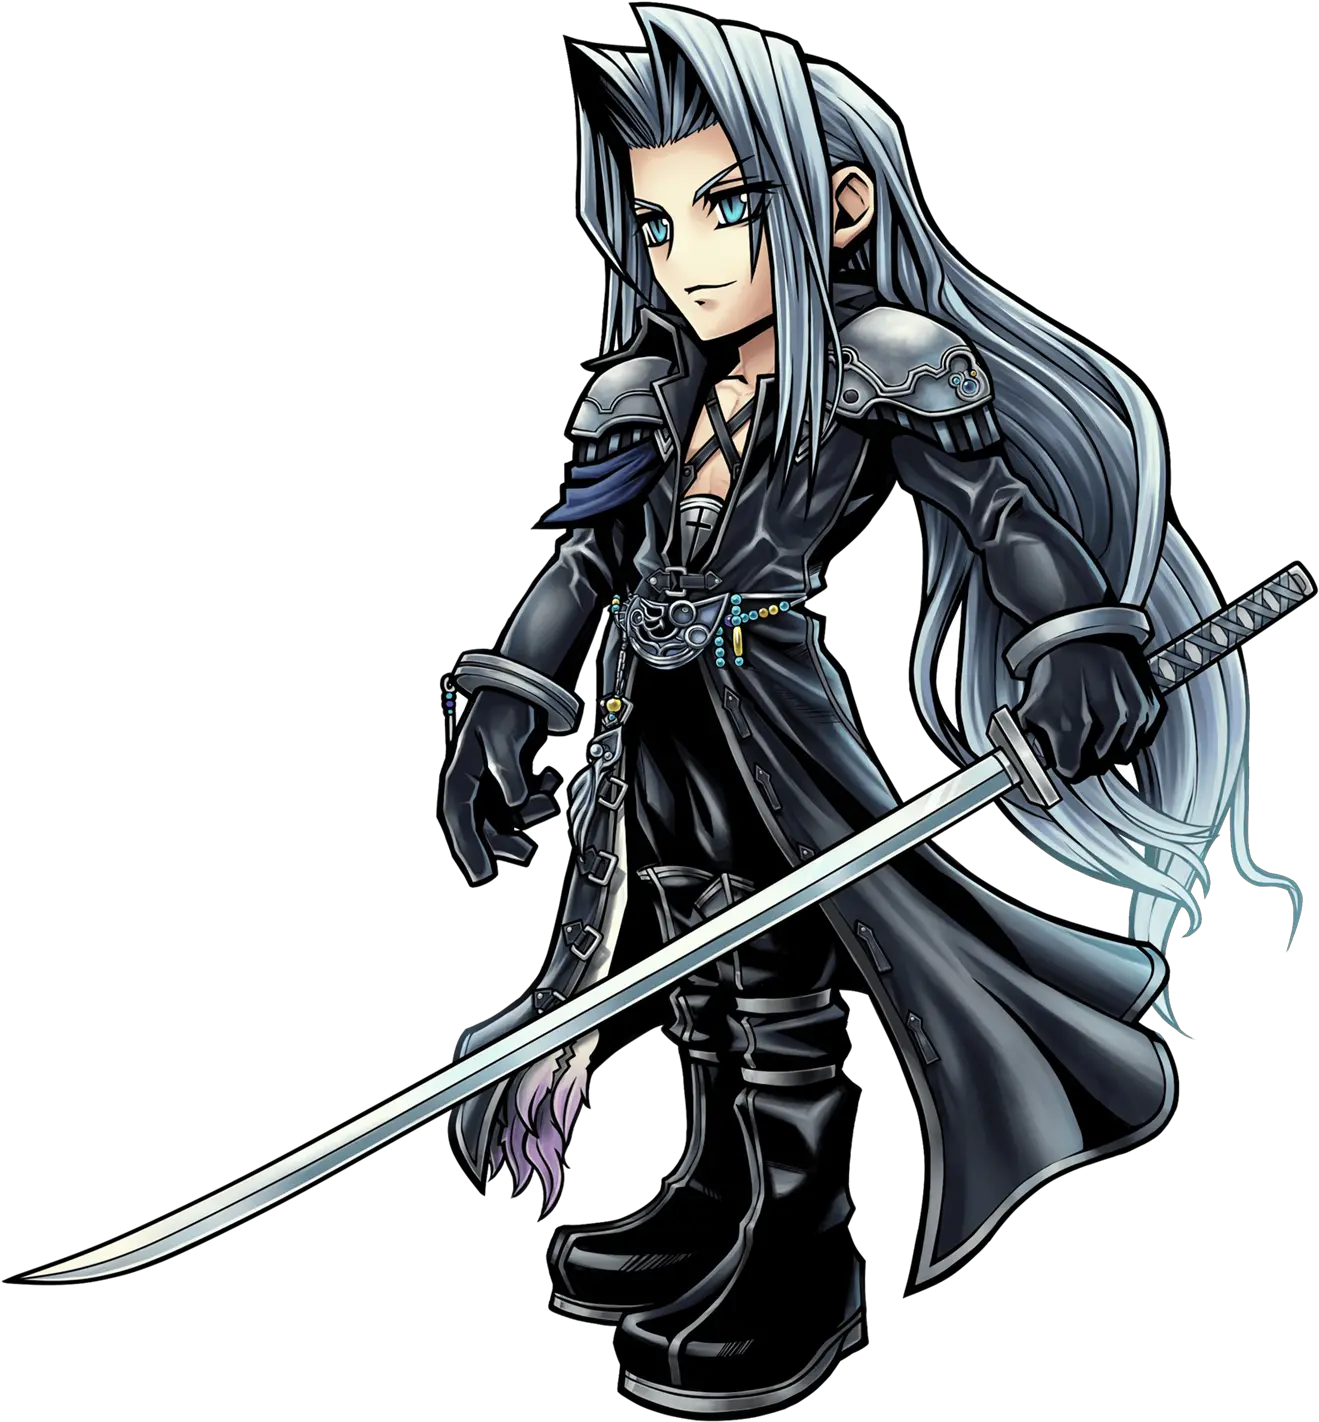 Sephiroth Png Free Image Download